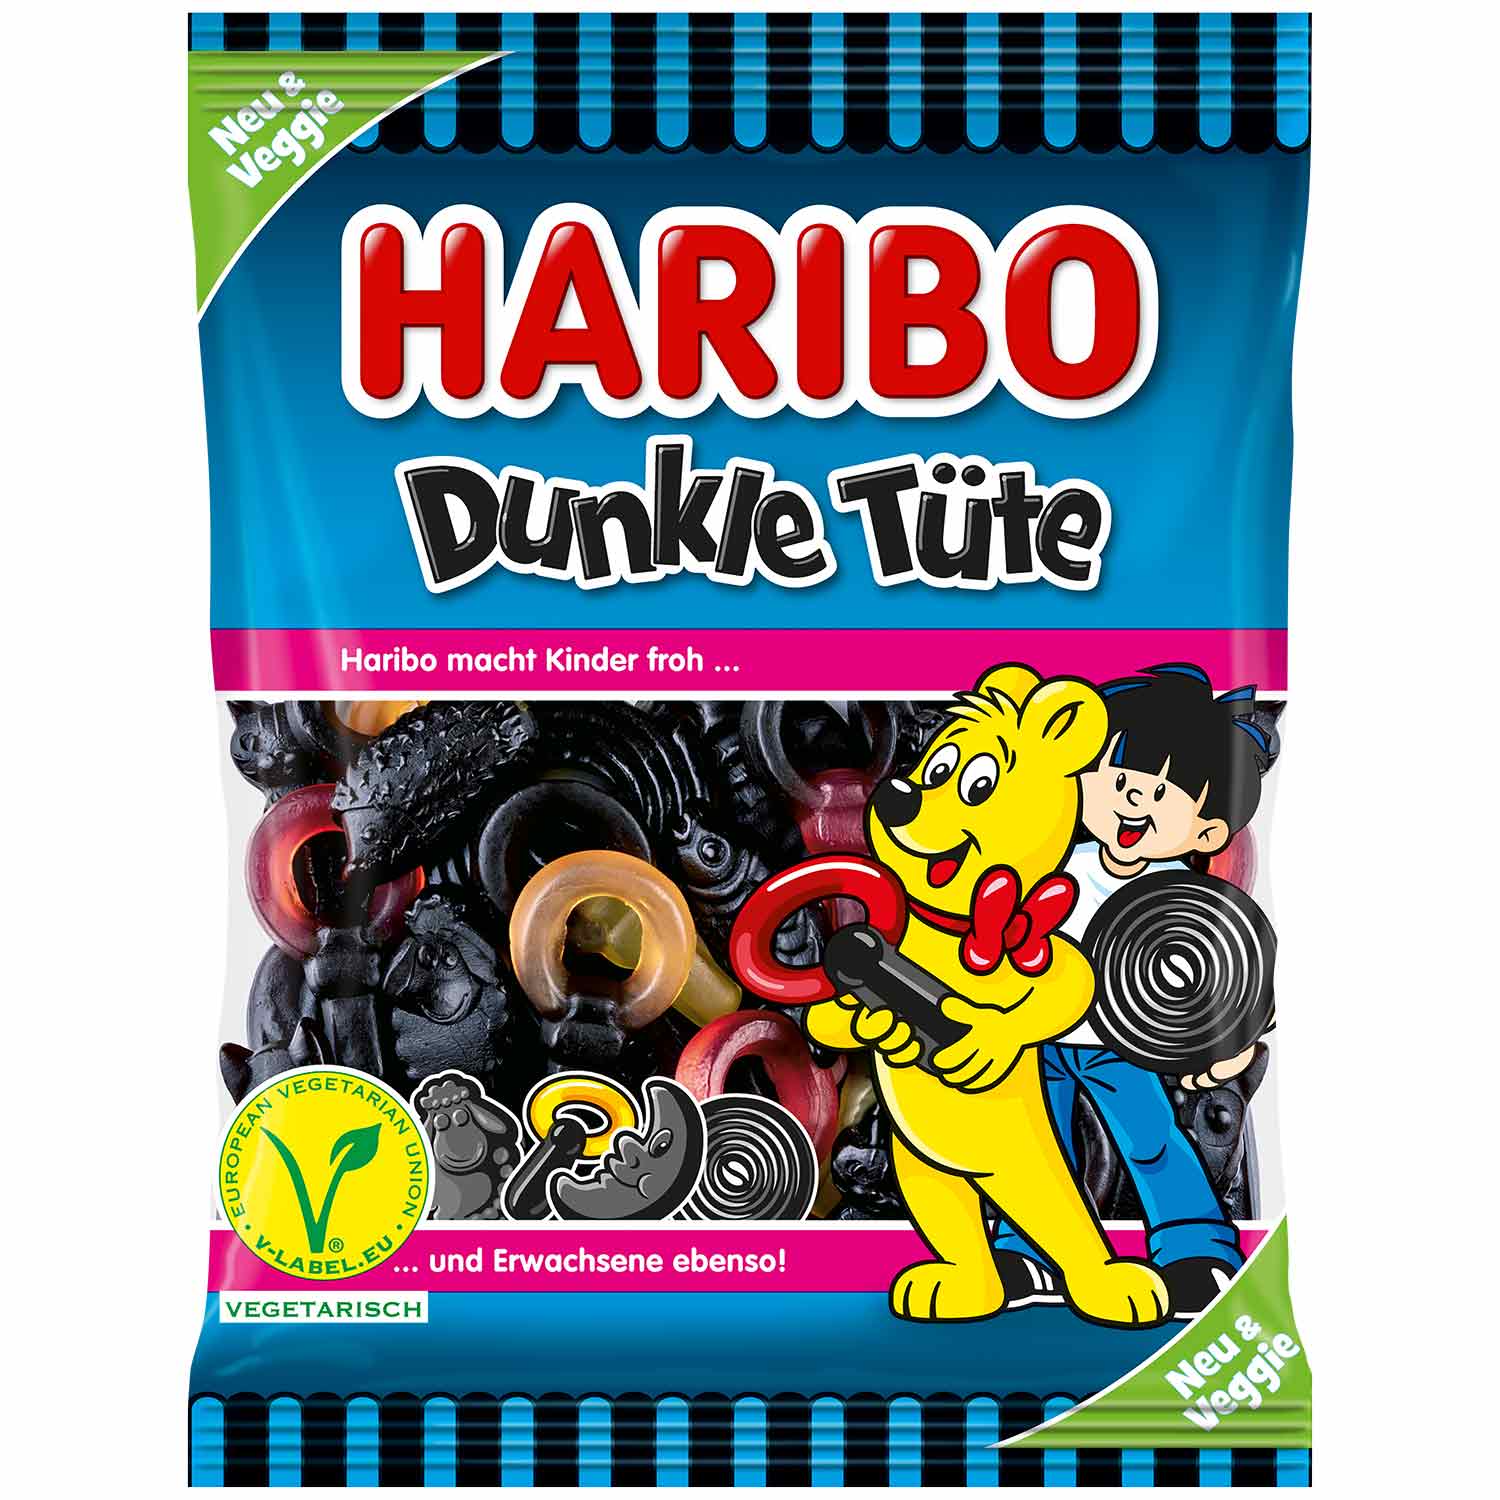 Haribo Dunkle Tuete 175g (Germany)